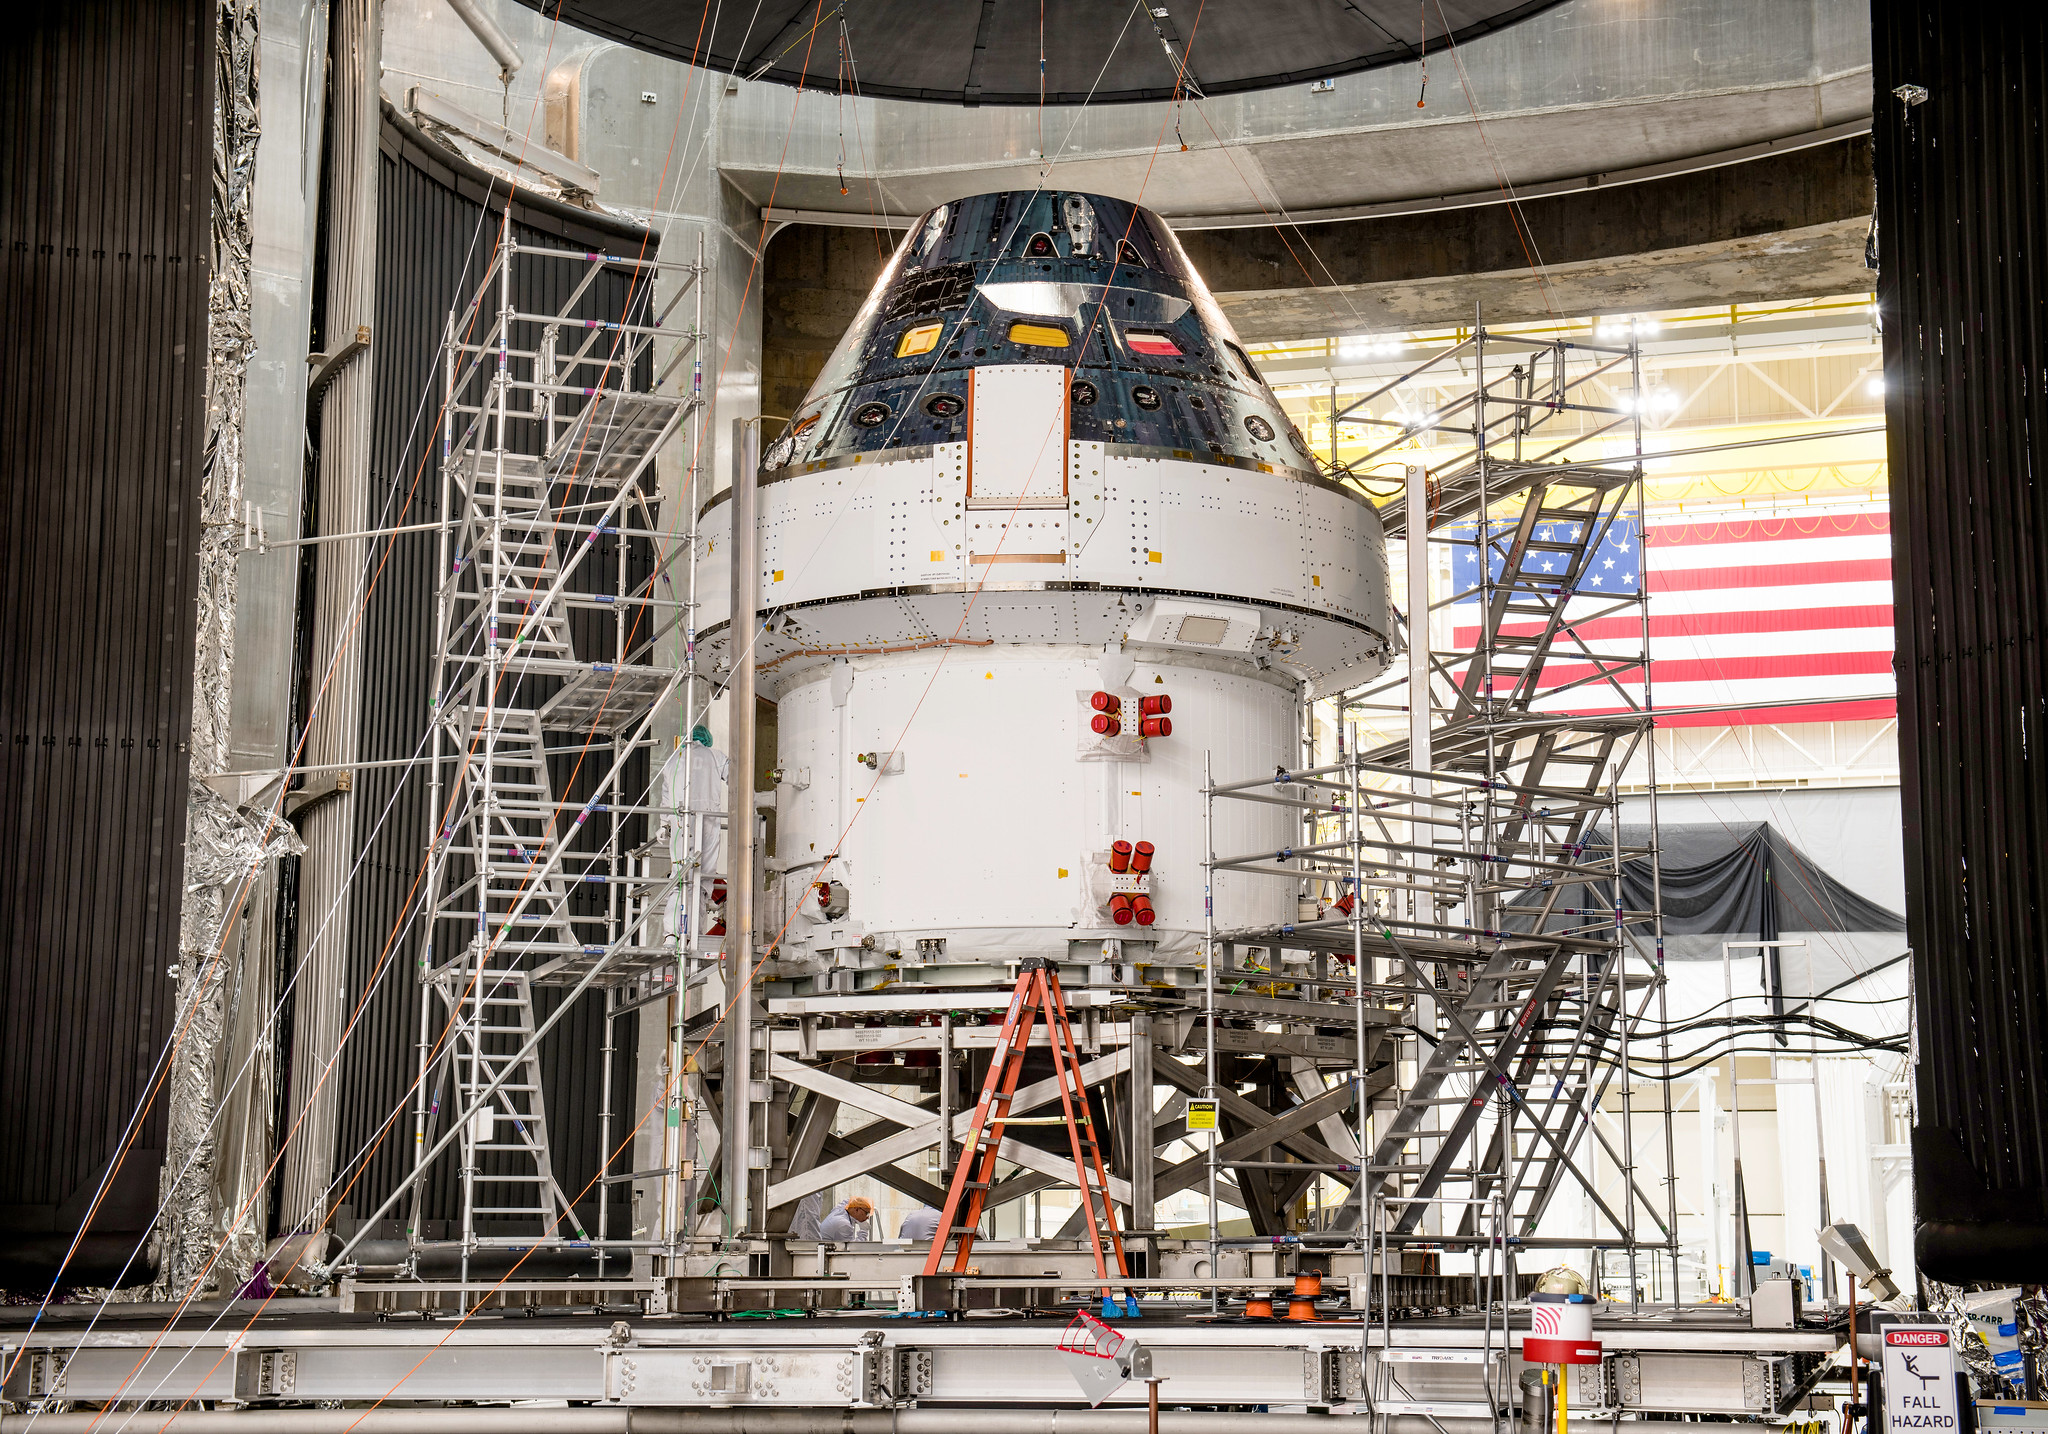 The Artemis I Orion spacecraft is prepared for the final set of environmental tests at NASA Glenn Research Center